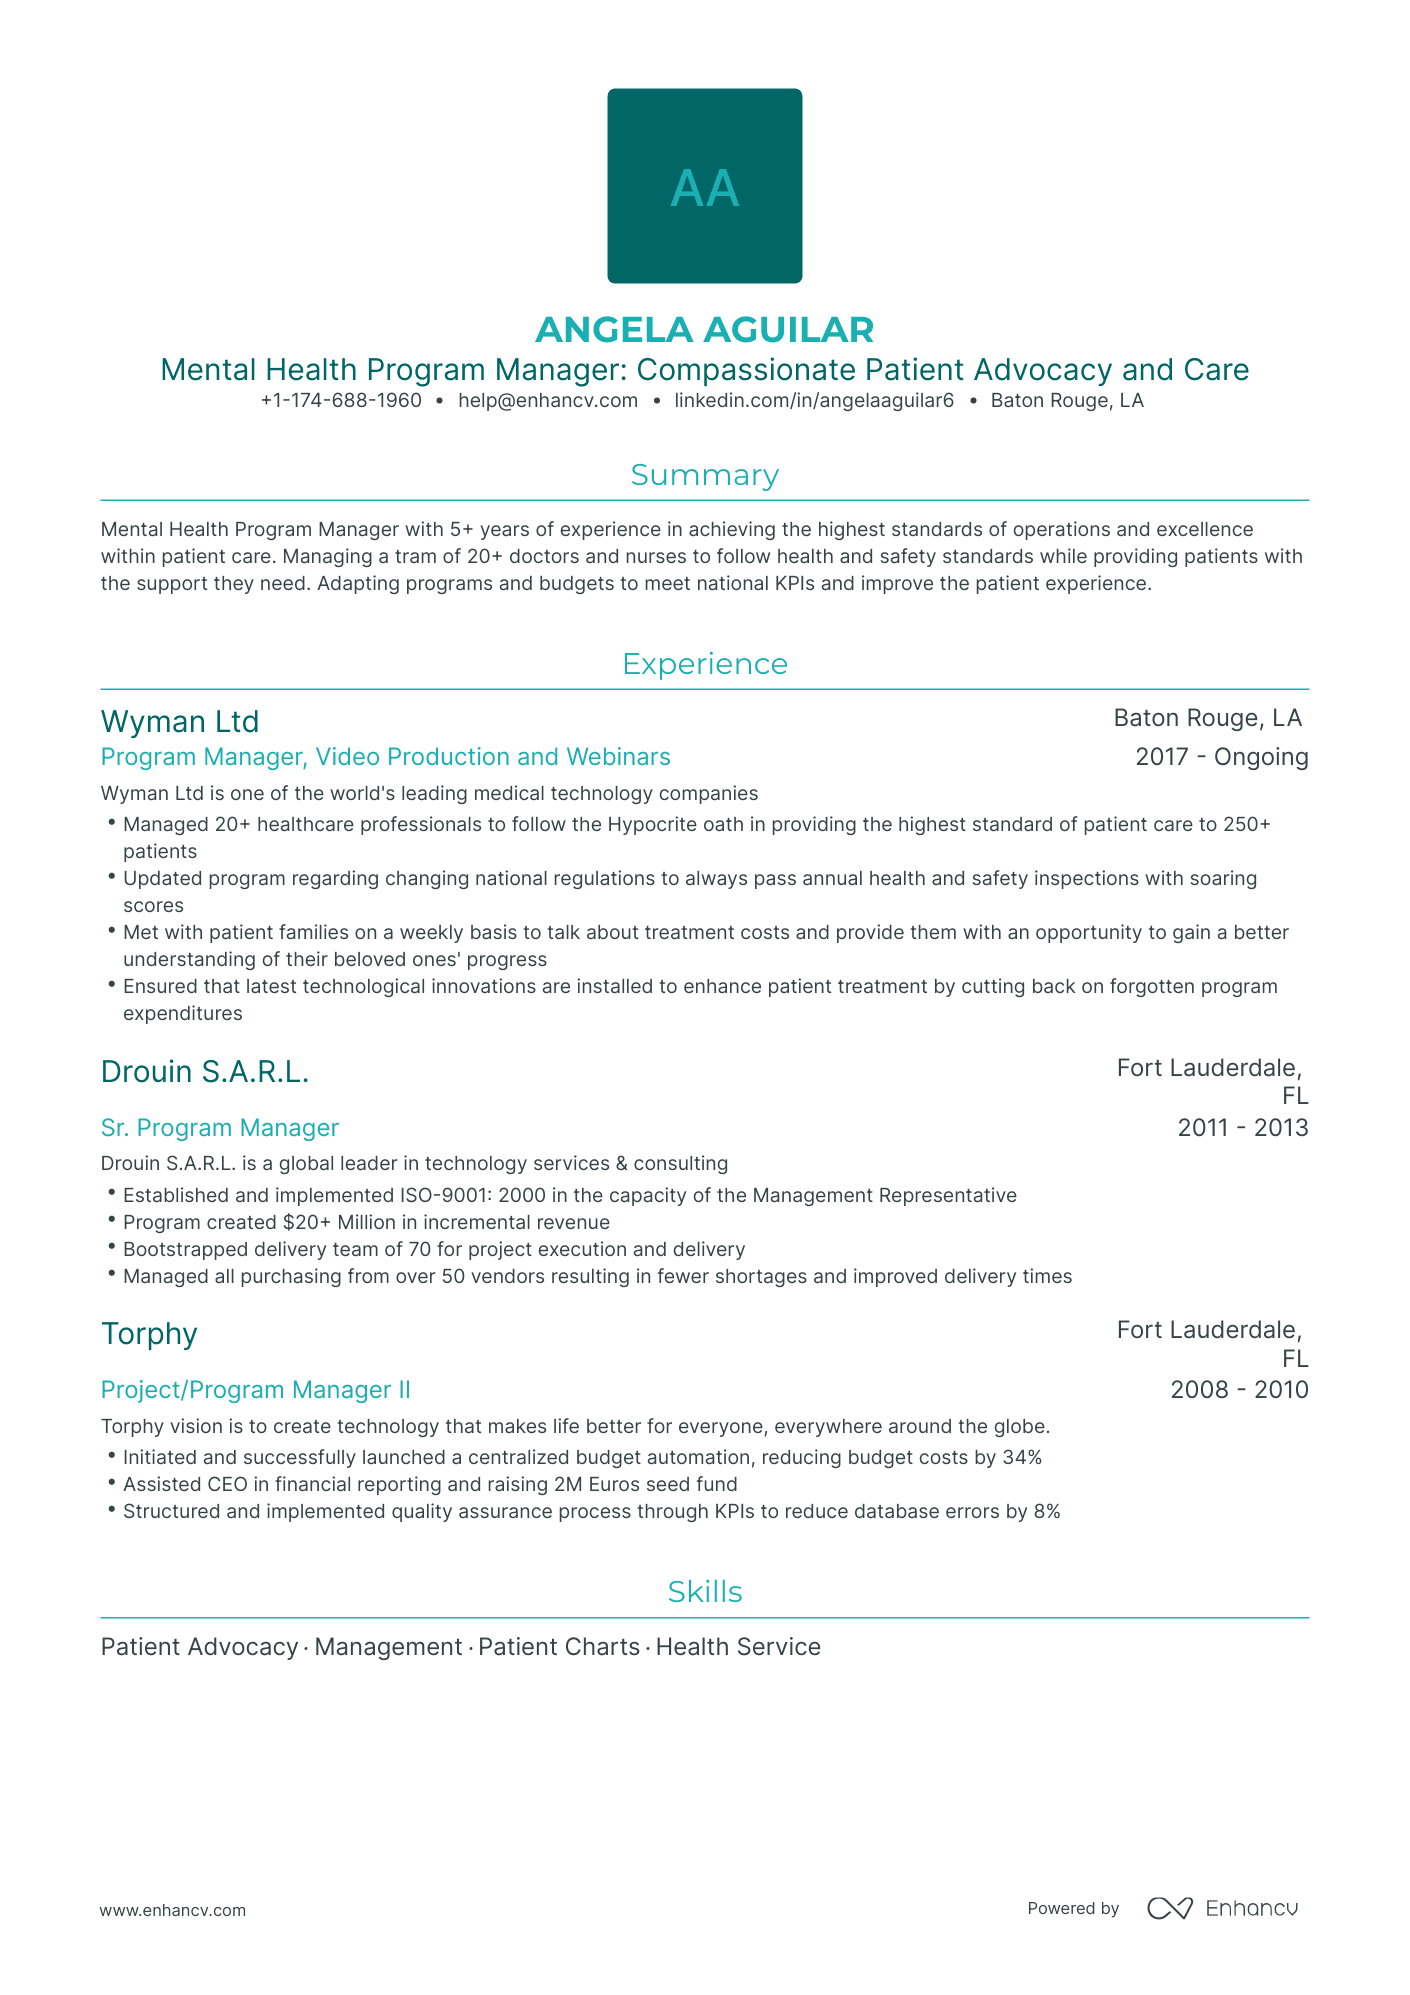 Traditional Mental Health Program Manager Resume Template